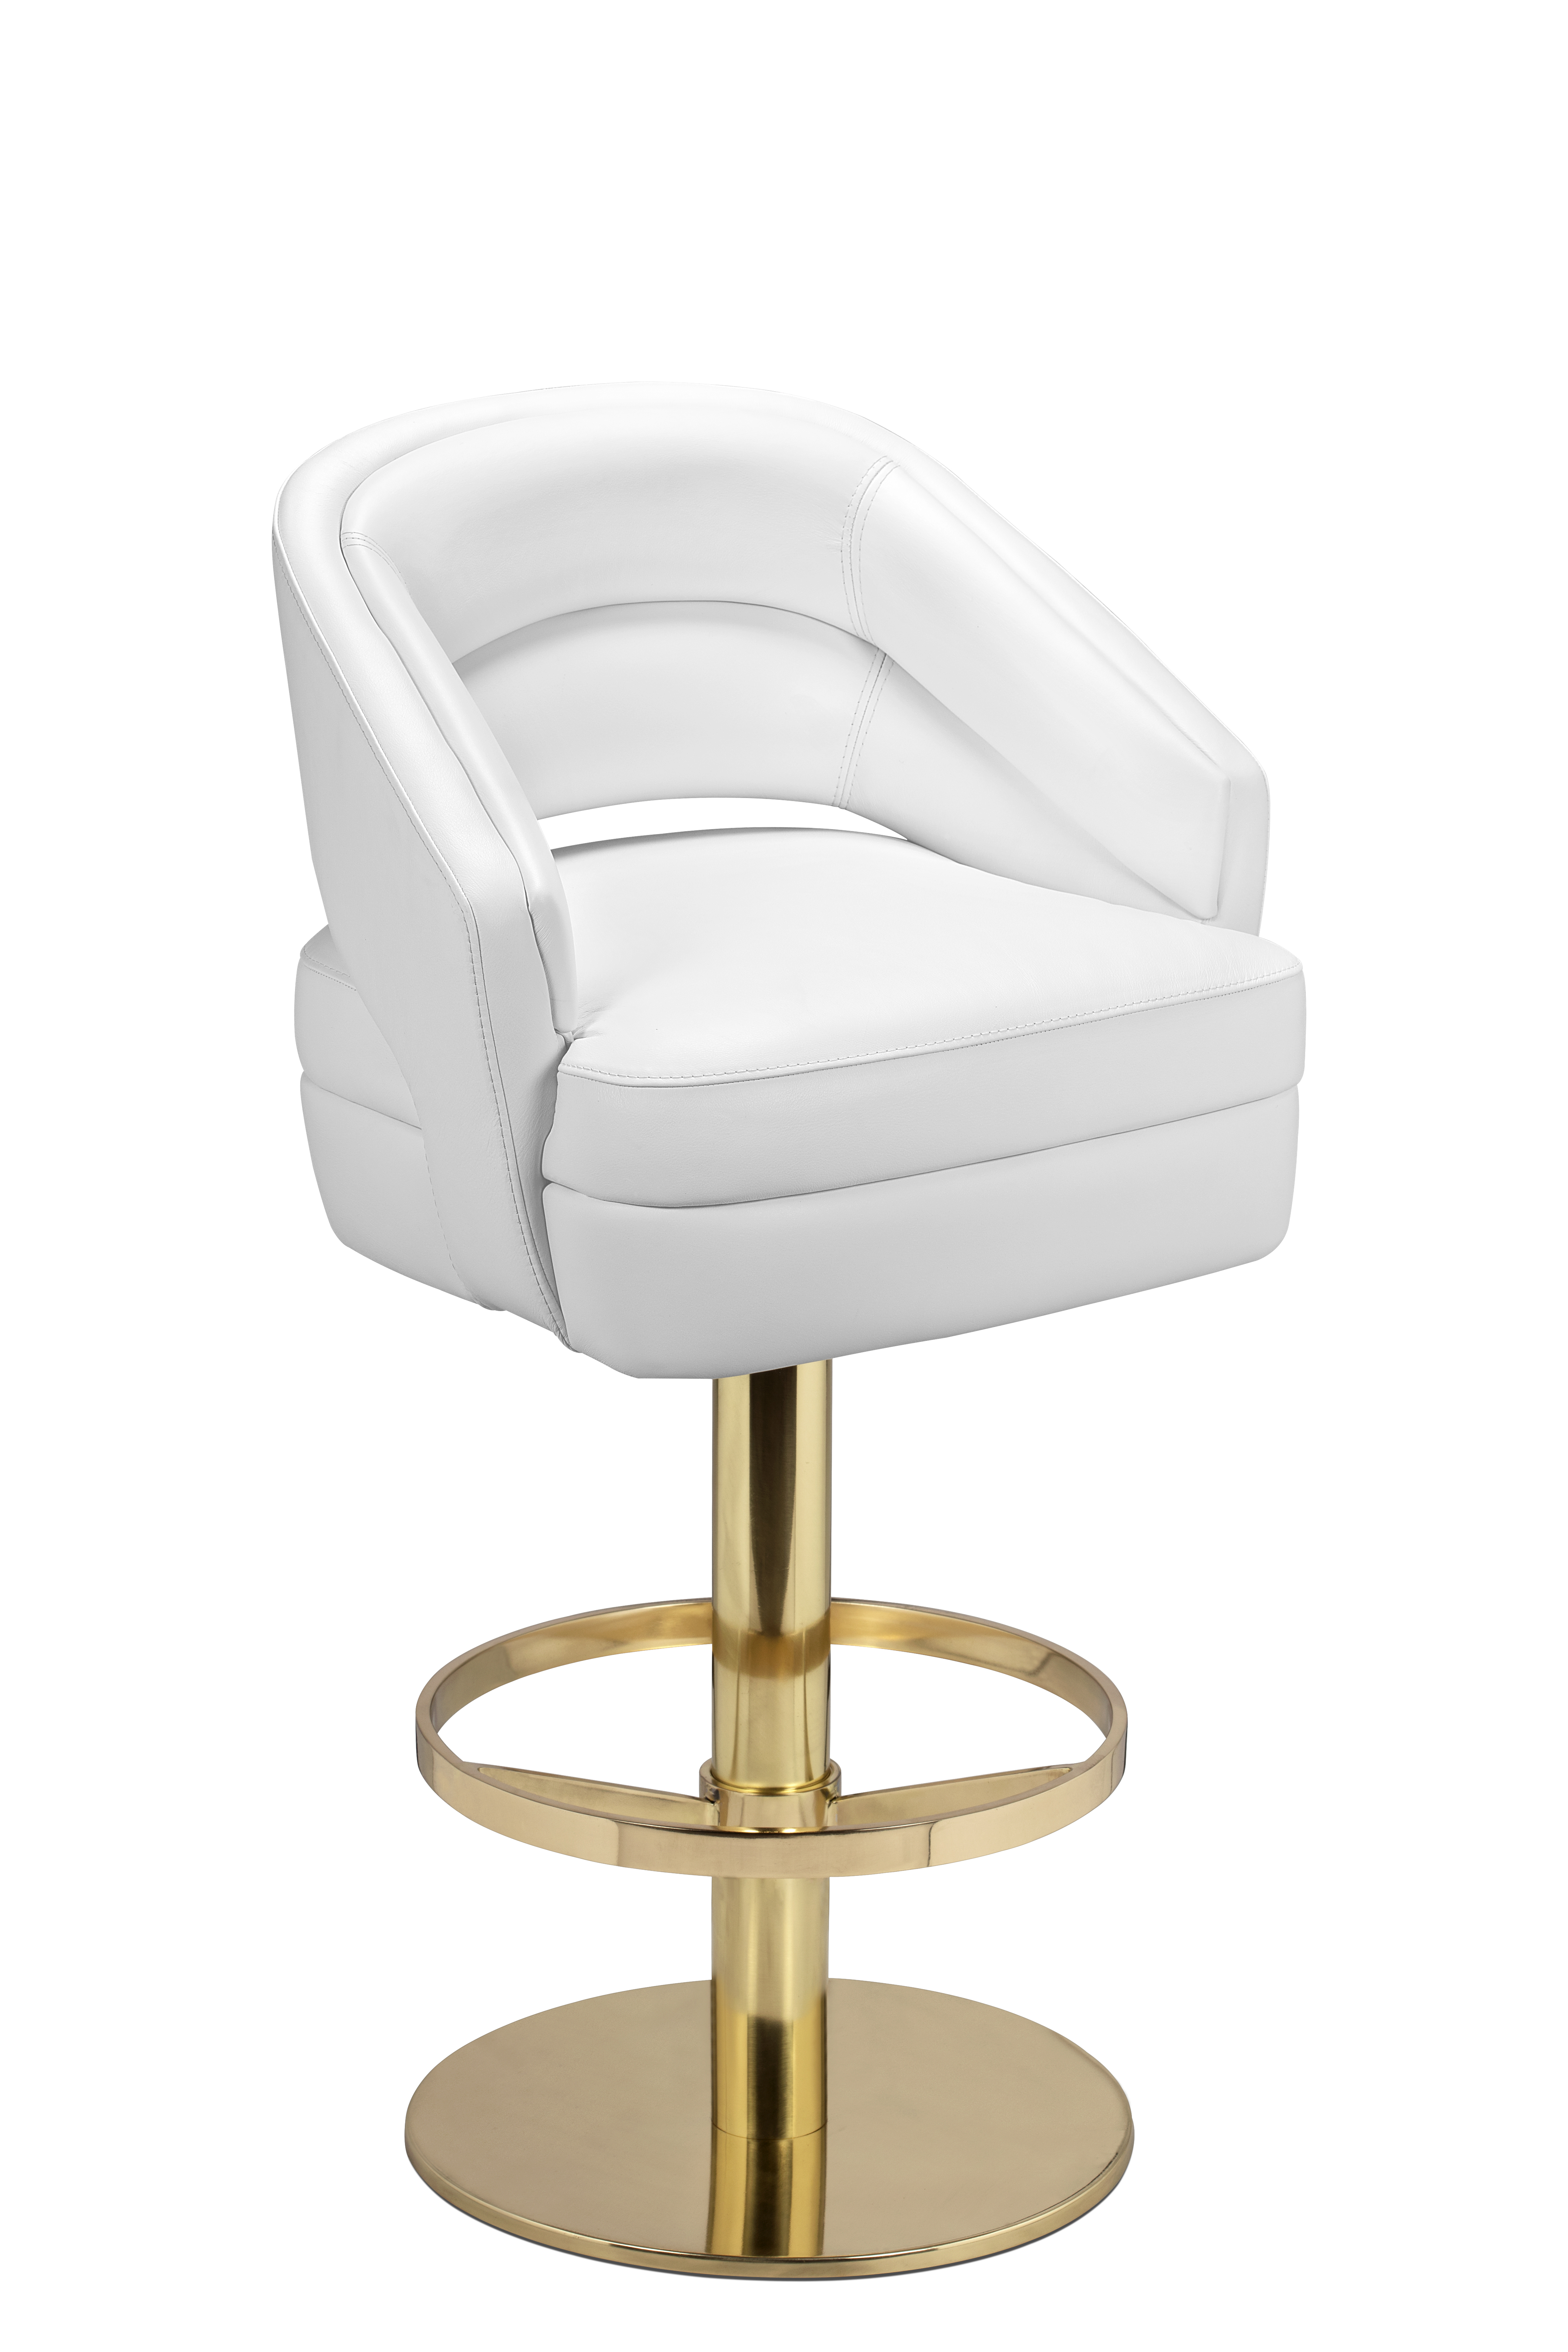 Find Here the Bar Stools with Gold Legs That'll Change Your Home Decor